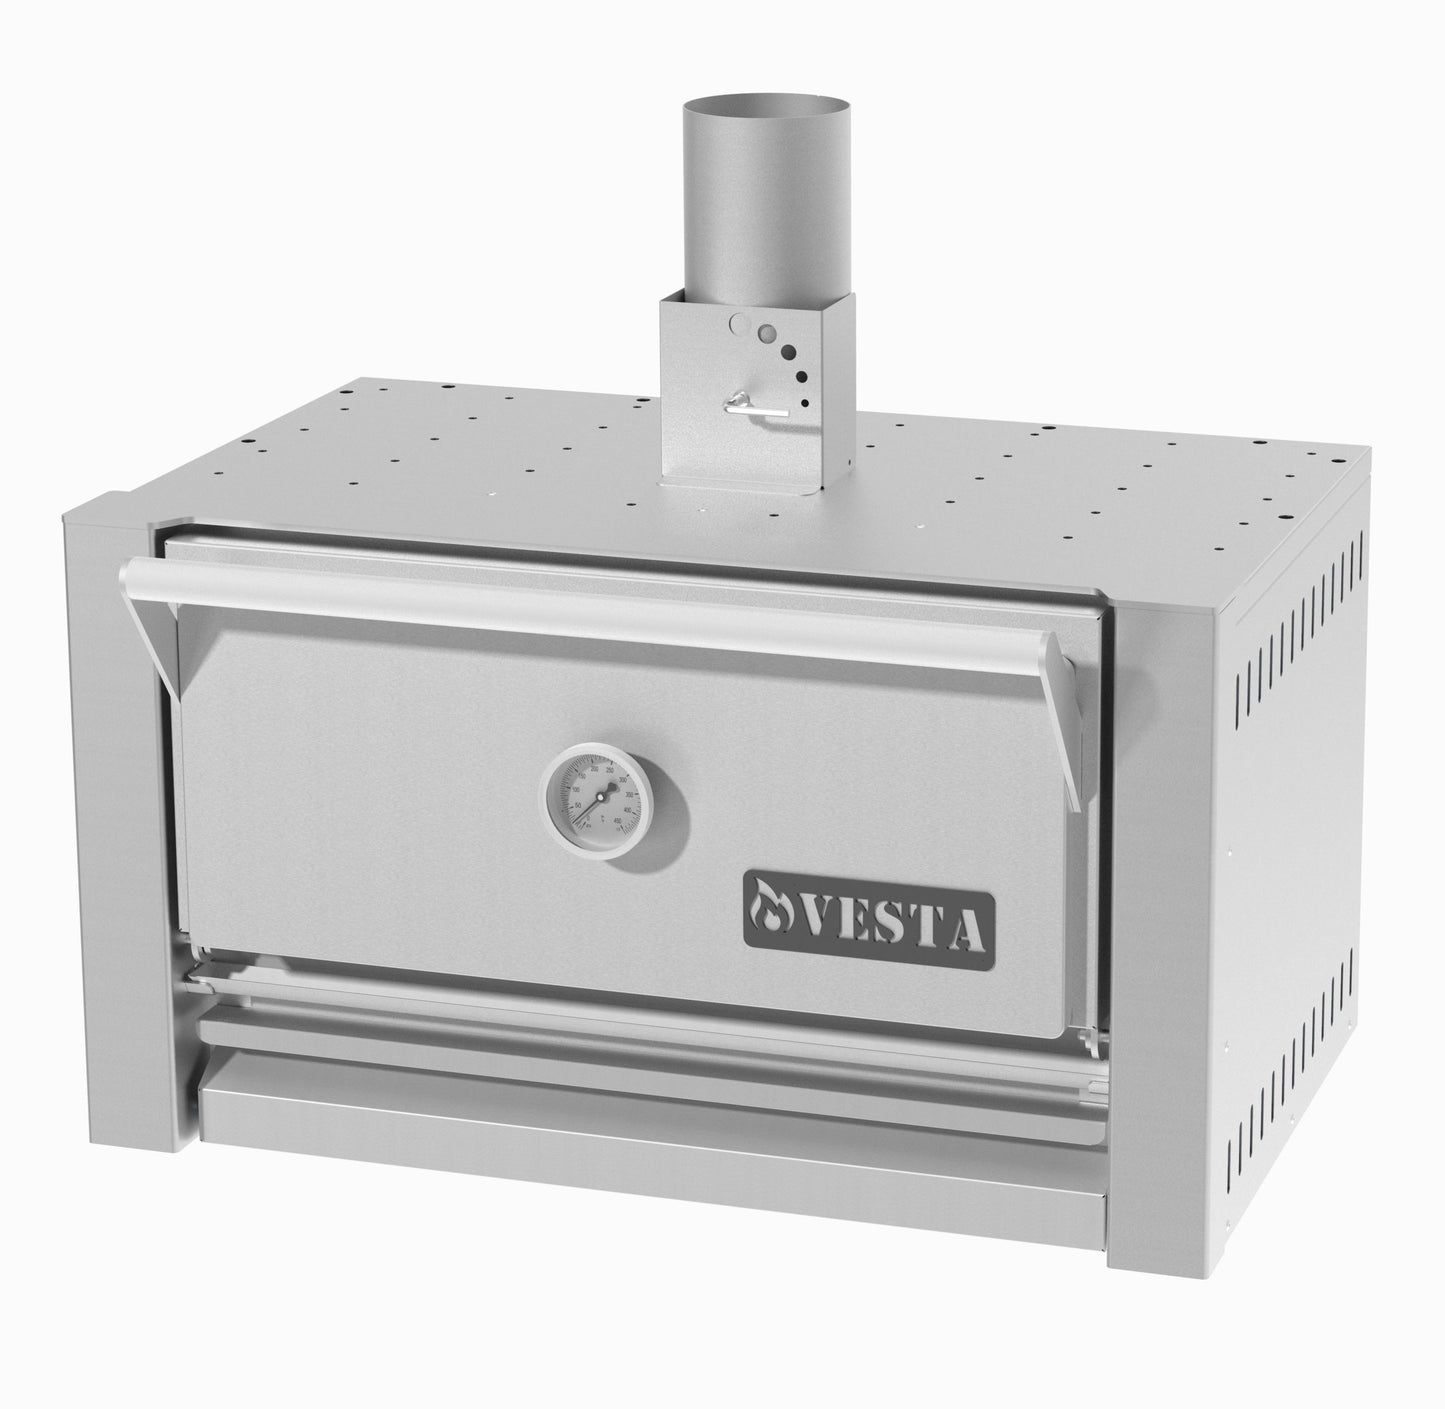 VESTA M38SD Charcoal Oven M38 with Stand and Dry Spark Arrestor